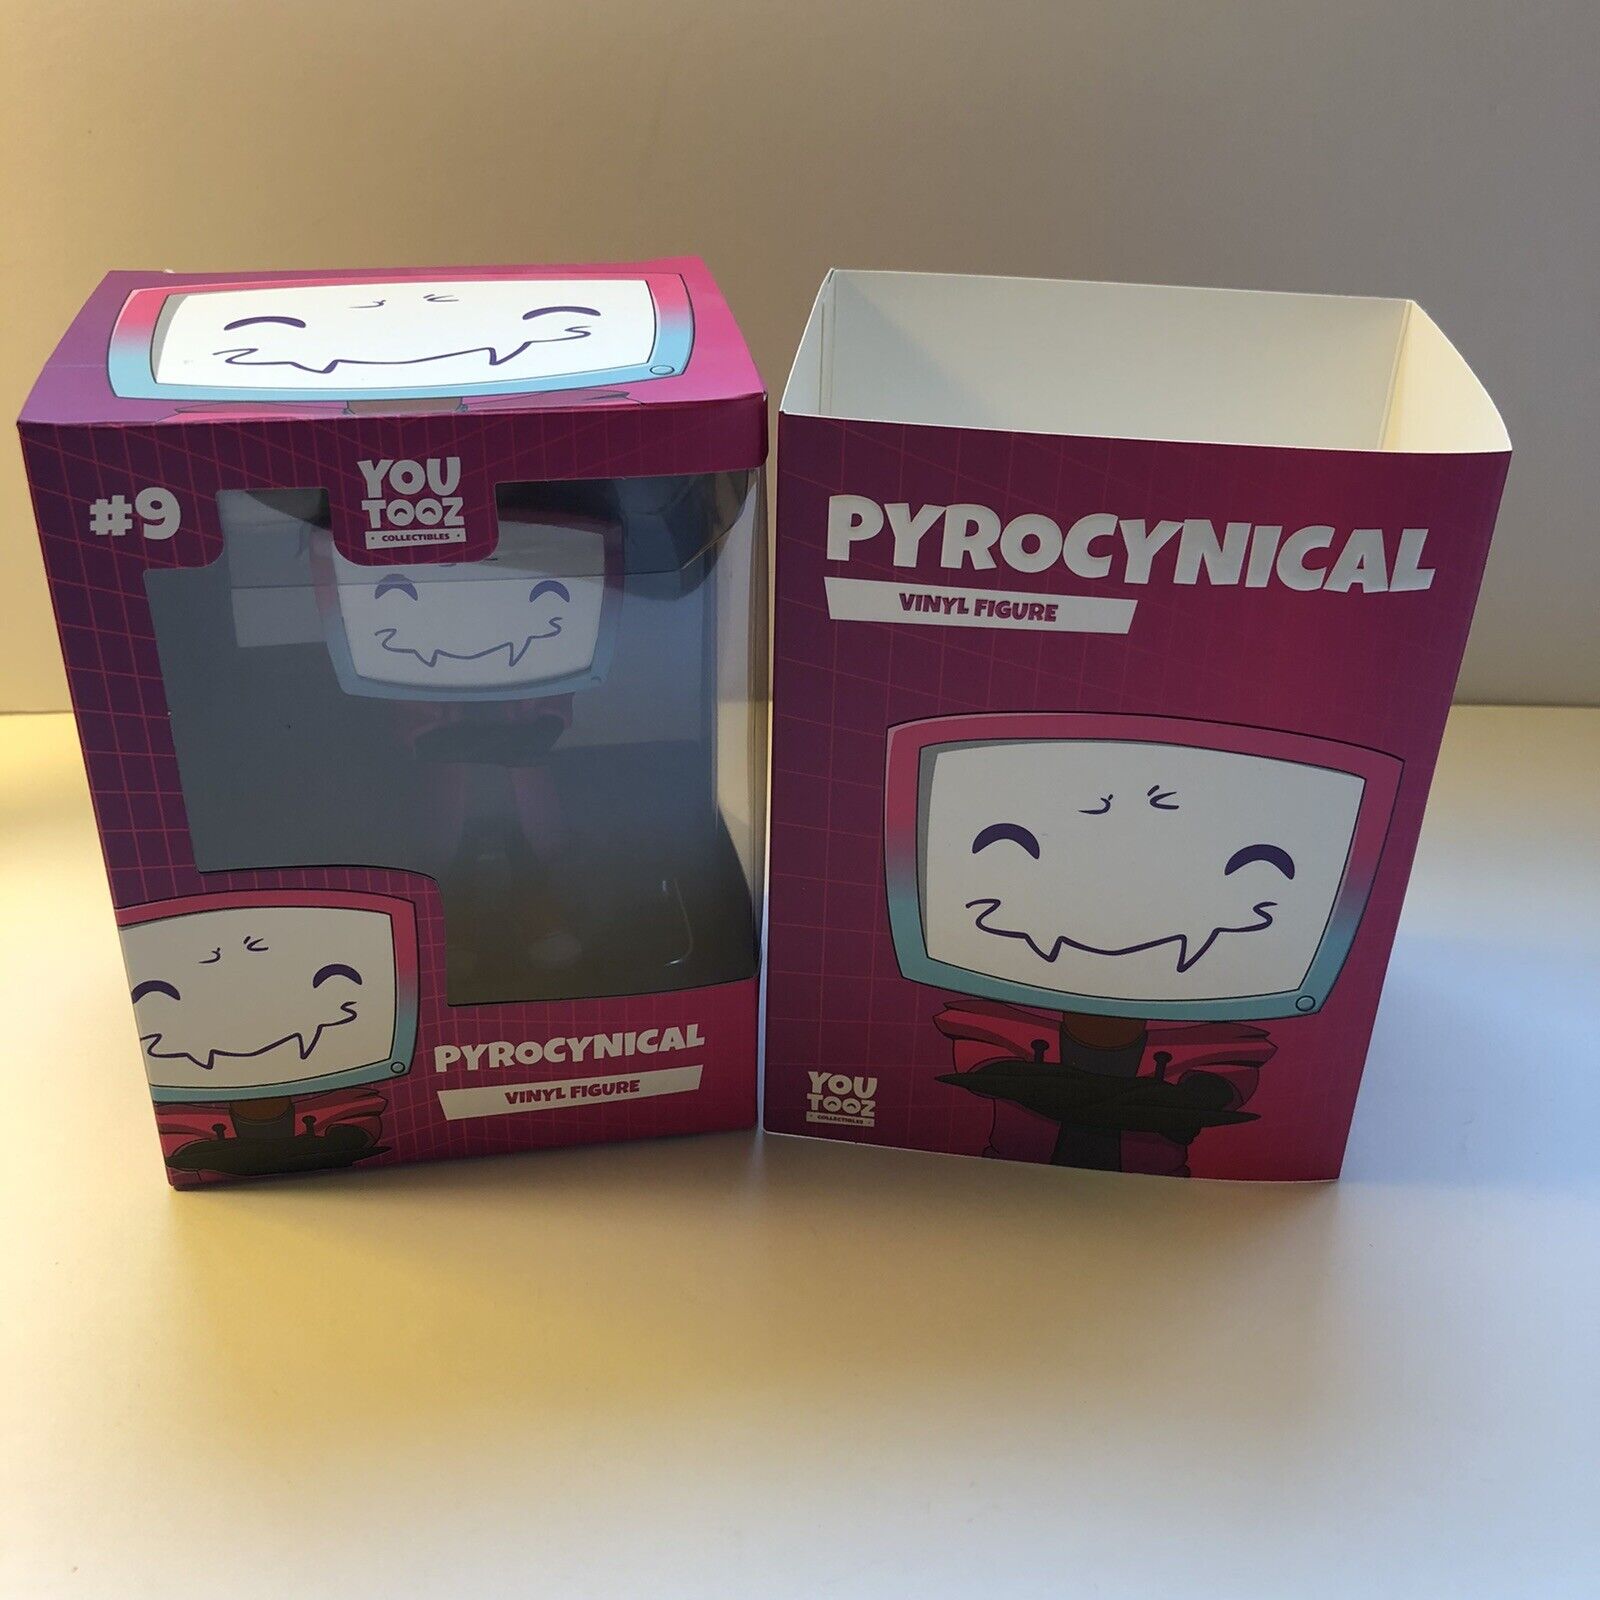 Pyrocynical Rare Yootooz Pyrocynical Vinyl Figure #9 (SOLD OUT) You Tooz